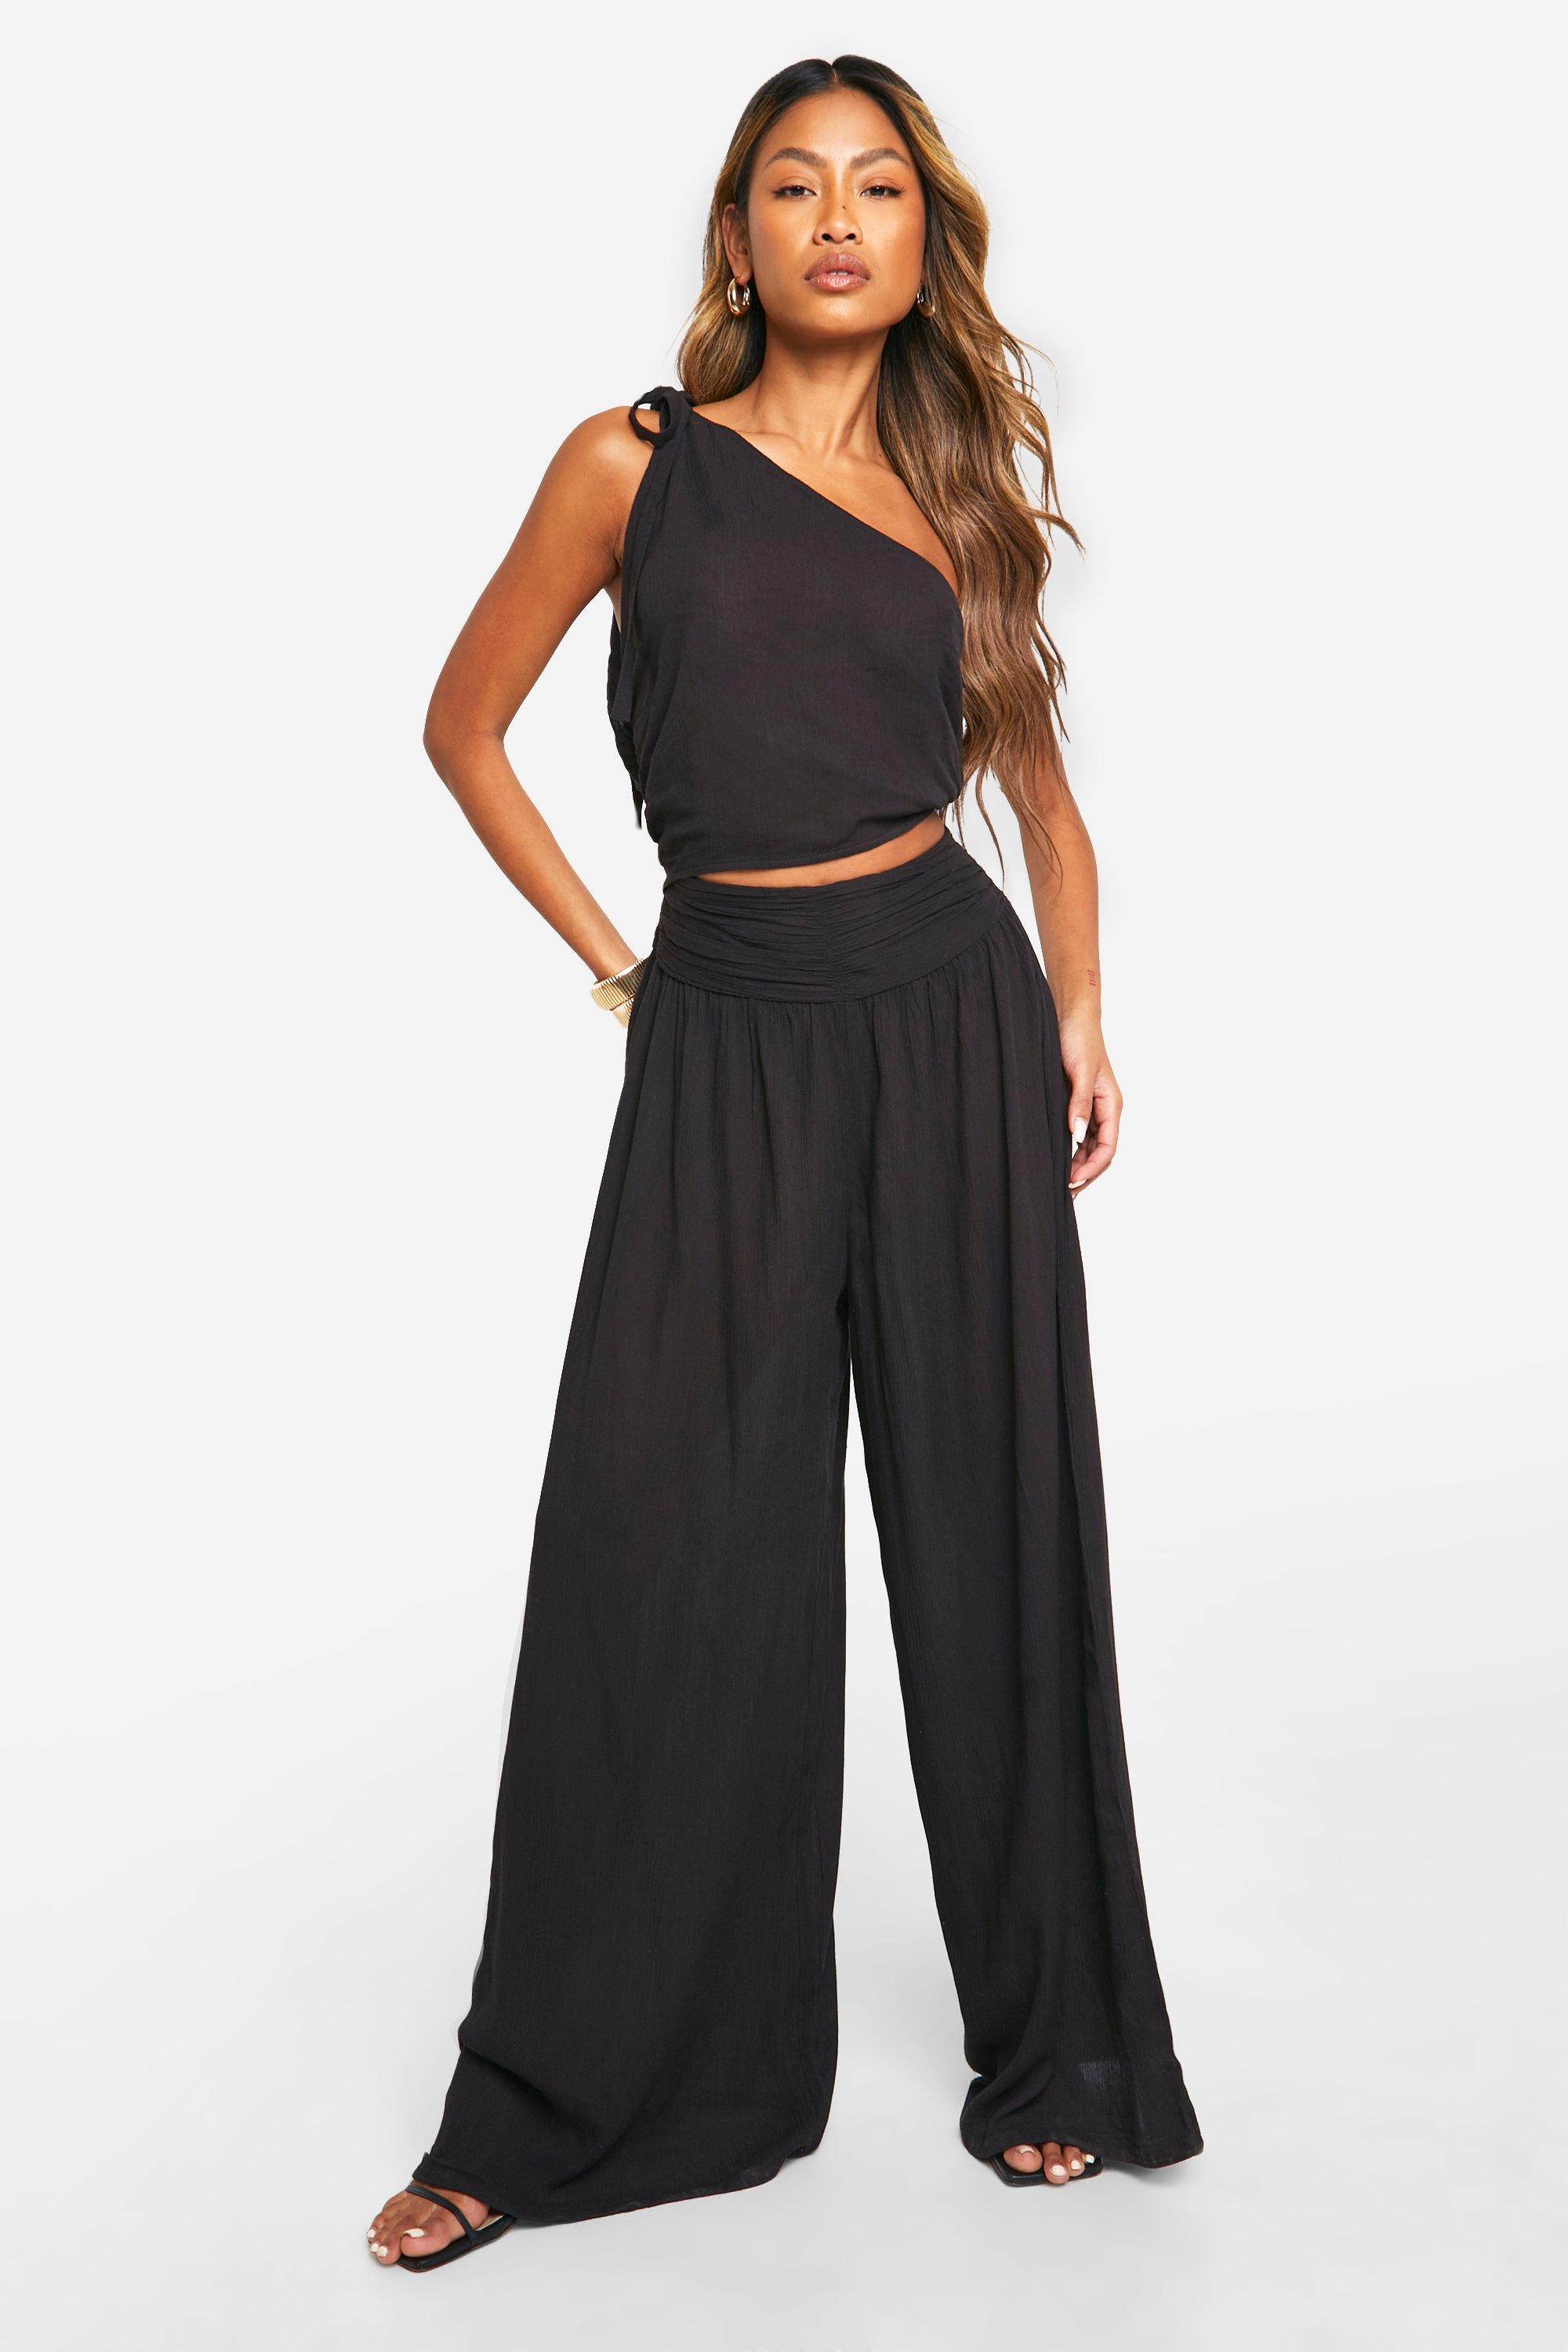 Boohoo Cheesecloth One Shoulder Cut Out Maxi Dress, Black